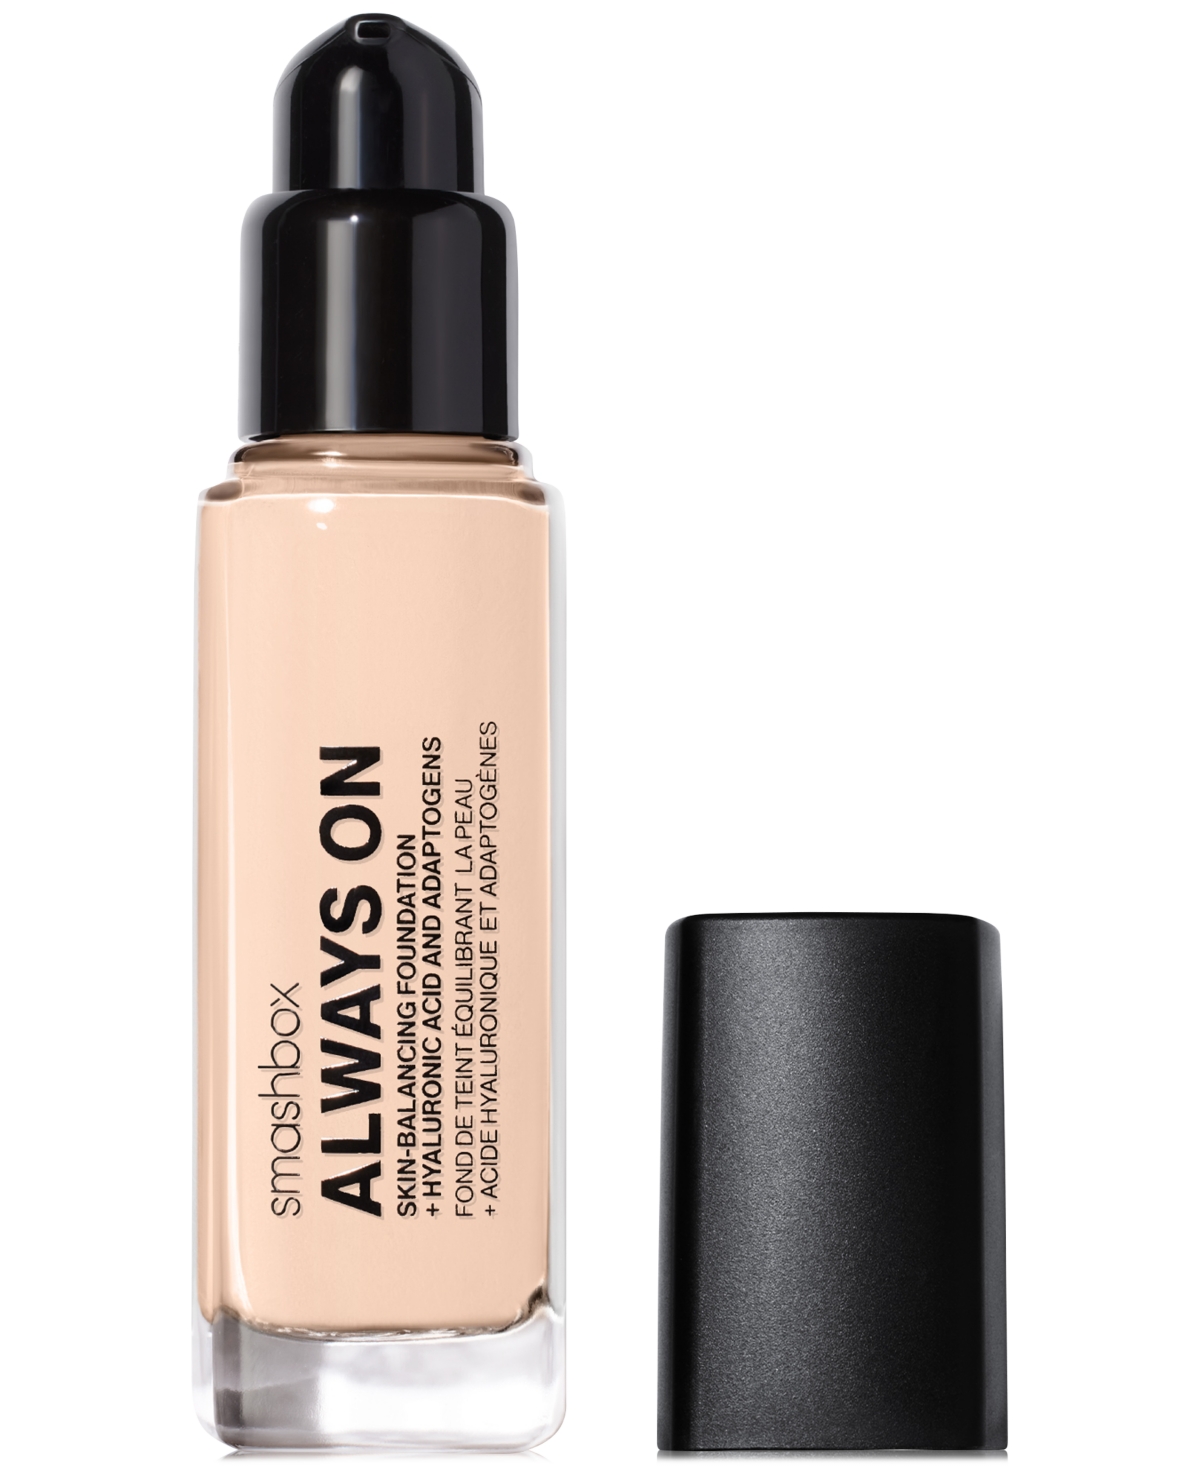 Smashbox Always On Skin-balancing Foundation, 1 Oz. In Fc (level-one Fair With A Cool Undertone